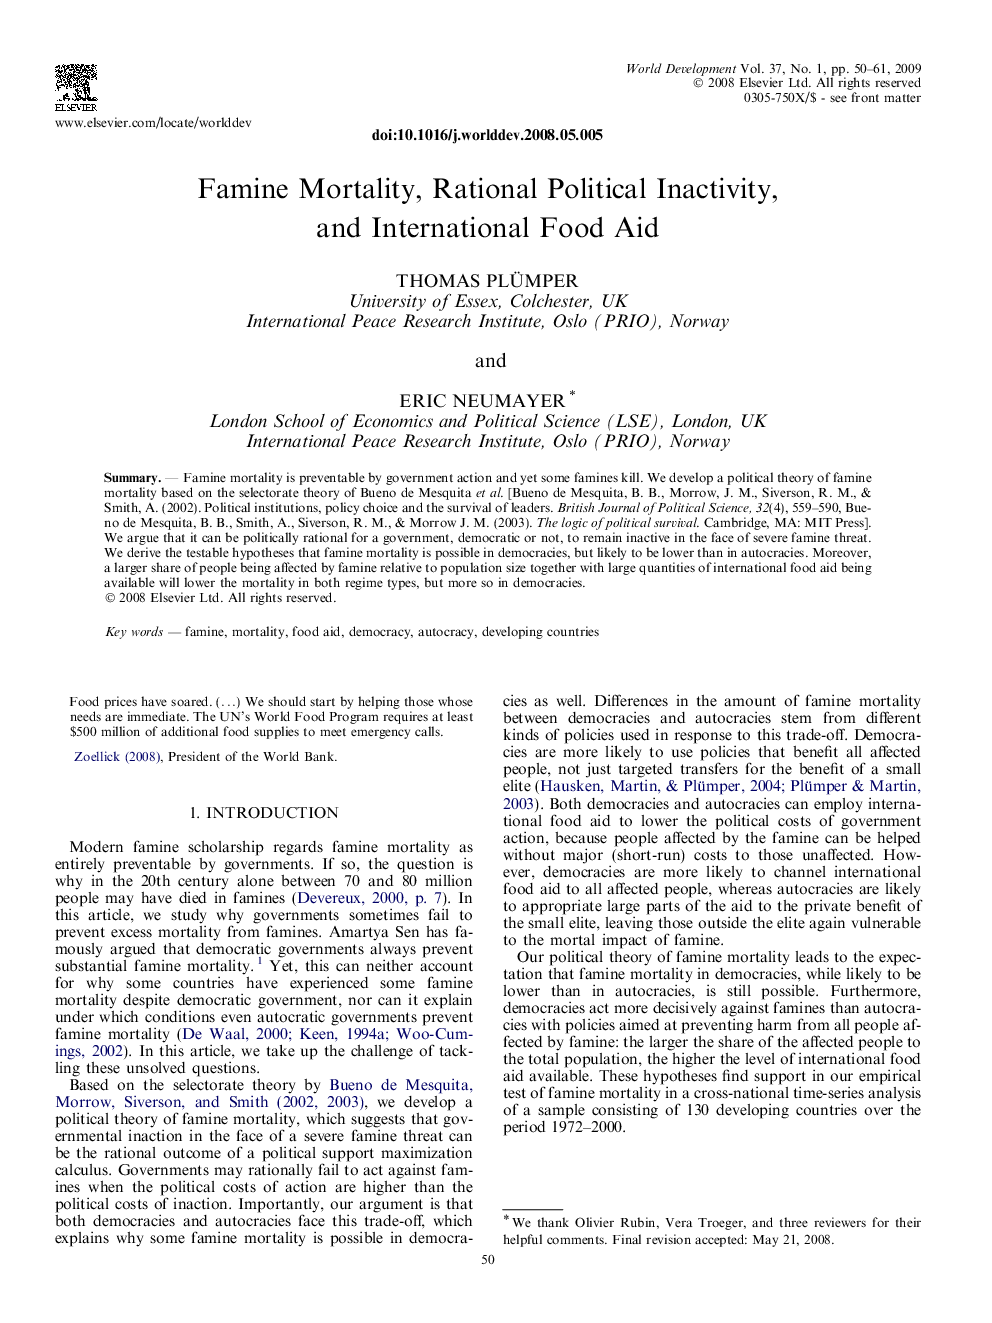 Famine Mortality, Rational Political Inactivity, and International Food Aid